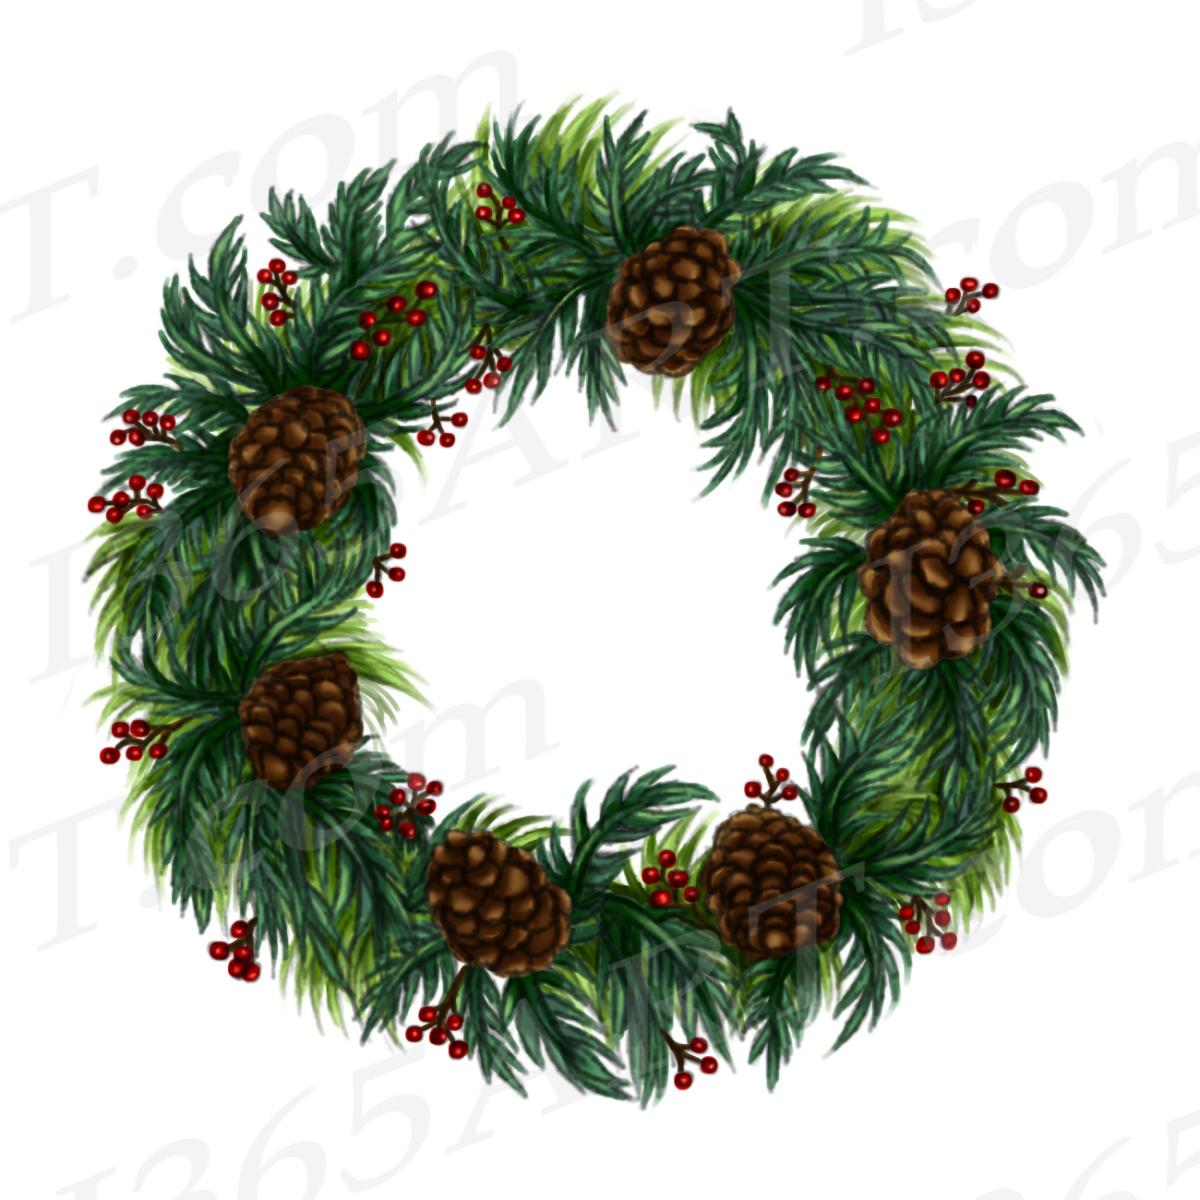 pine wreath with pine cones and berries